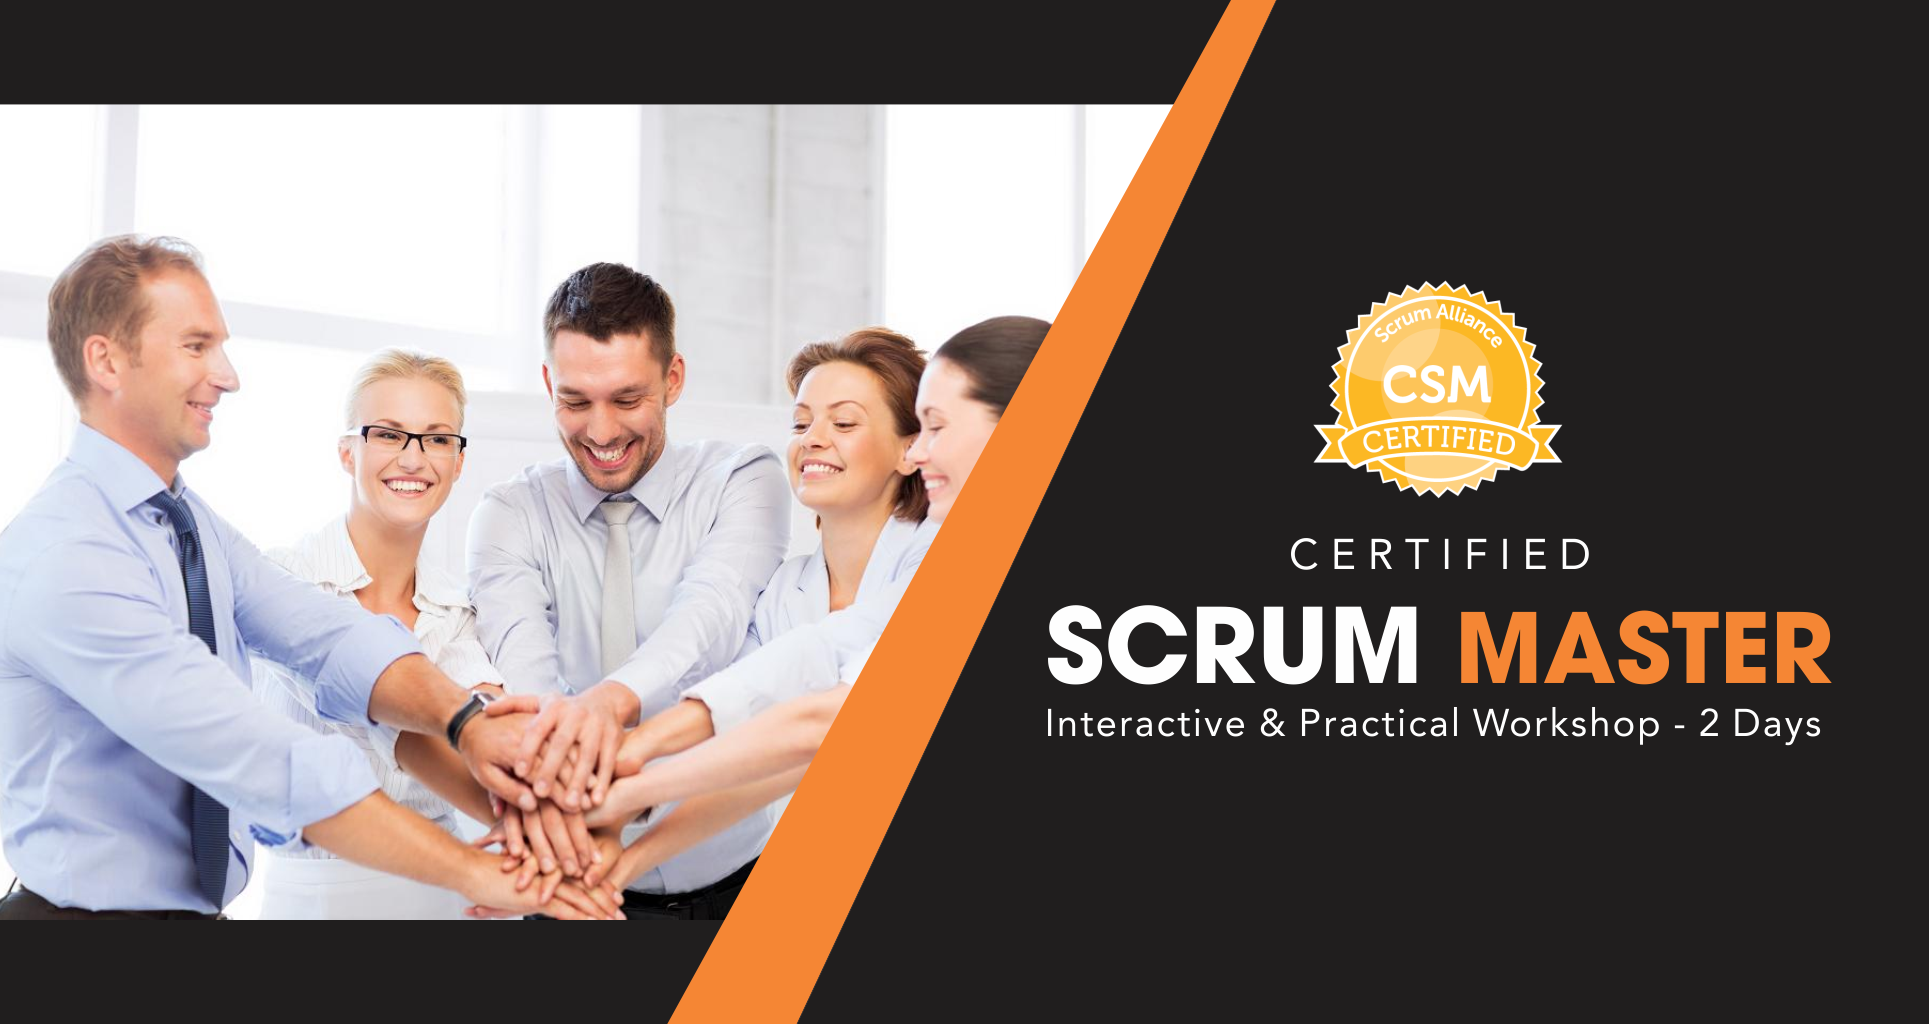 CSM (Certified Scrum Master) certification Training In Boise, ID